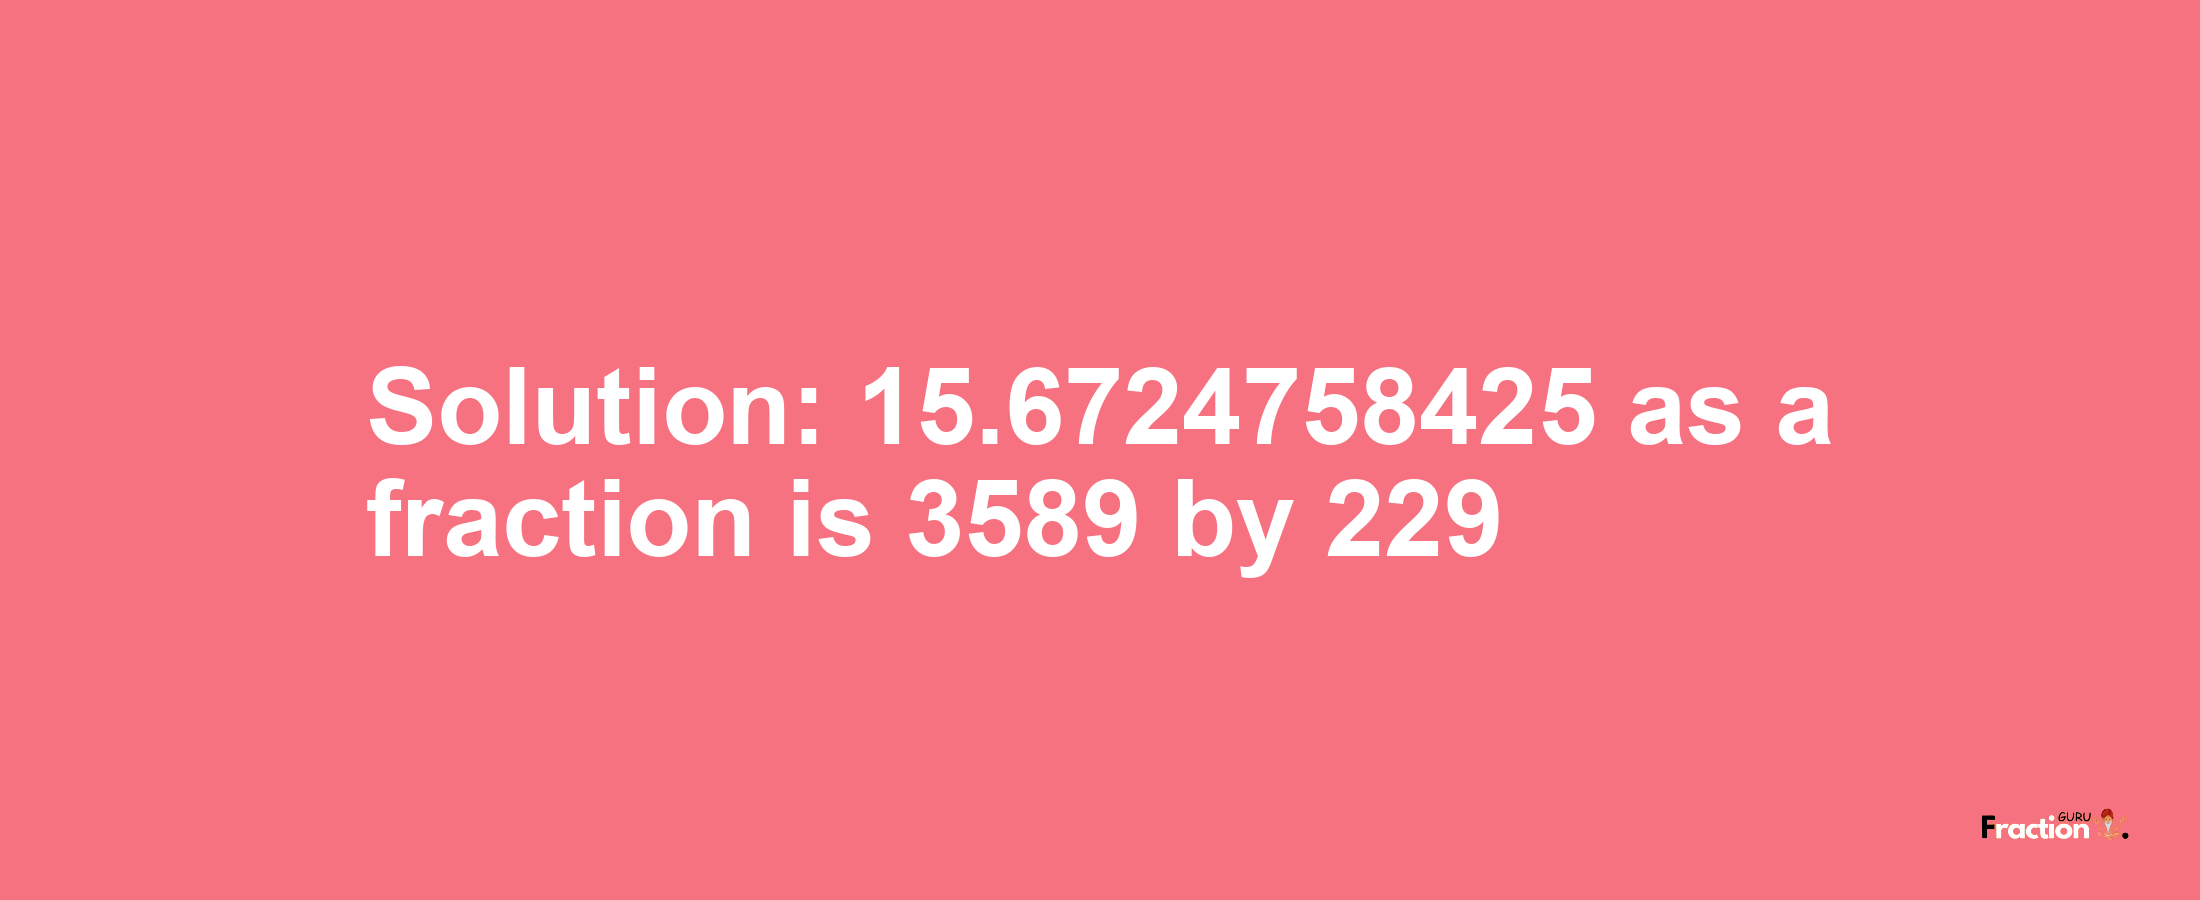 Solution:15.6724758425 as a fraction is 3589/229